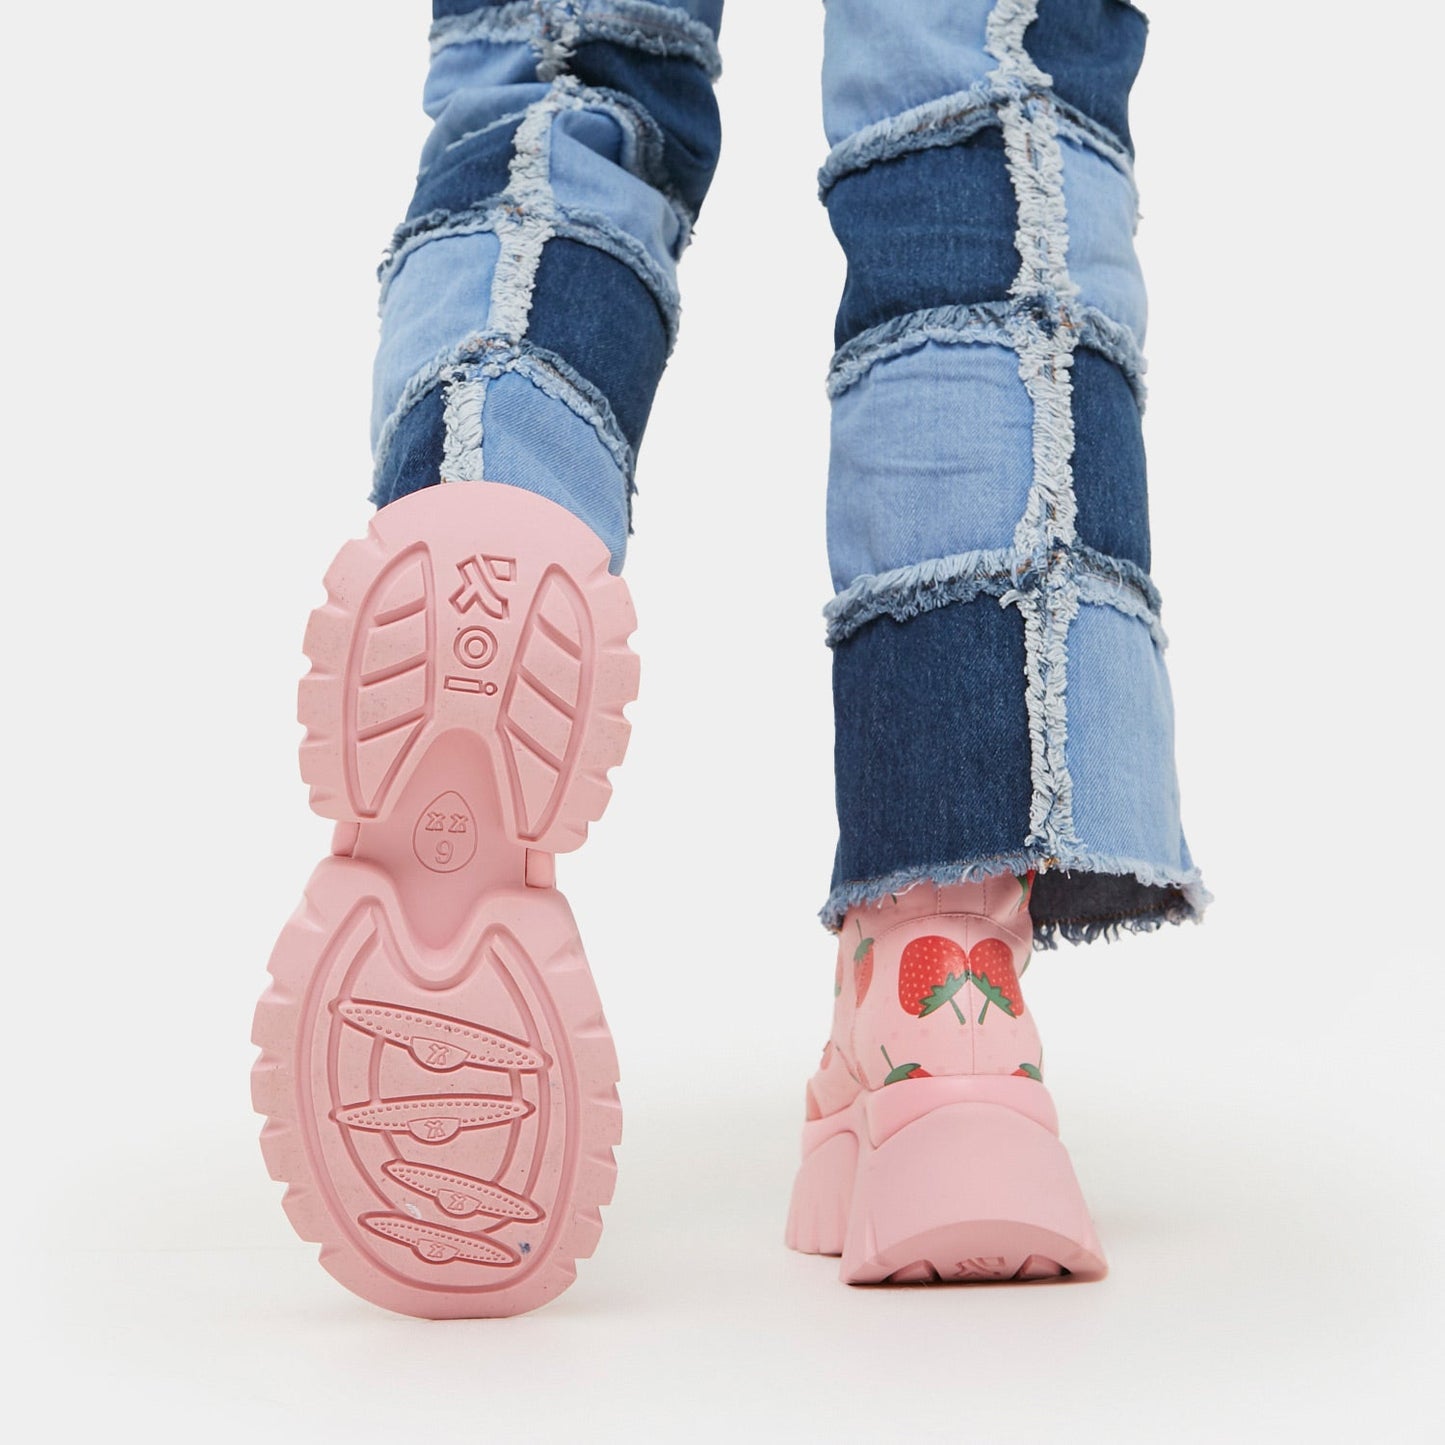 Strawberry Shortcake Pink Vilun Boots - Ankle Boots - KOI Footwear - Pink - Model Sole View